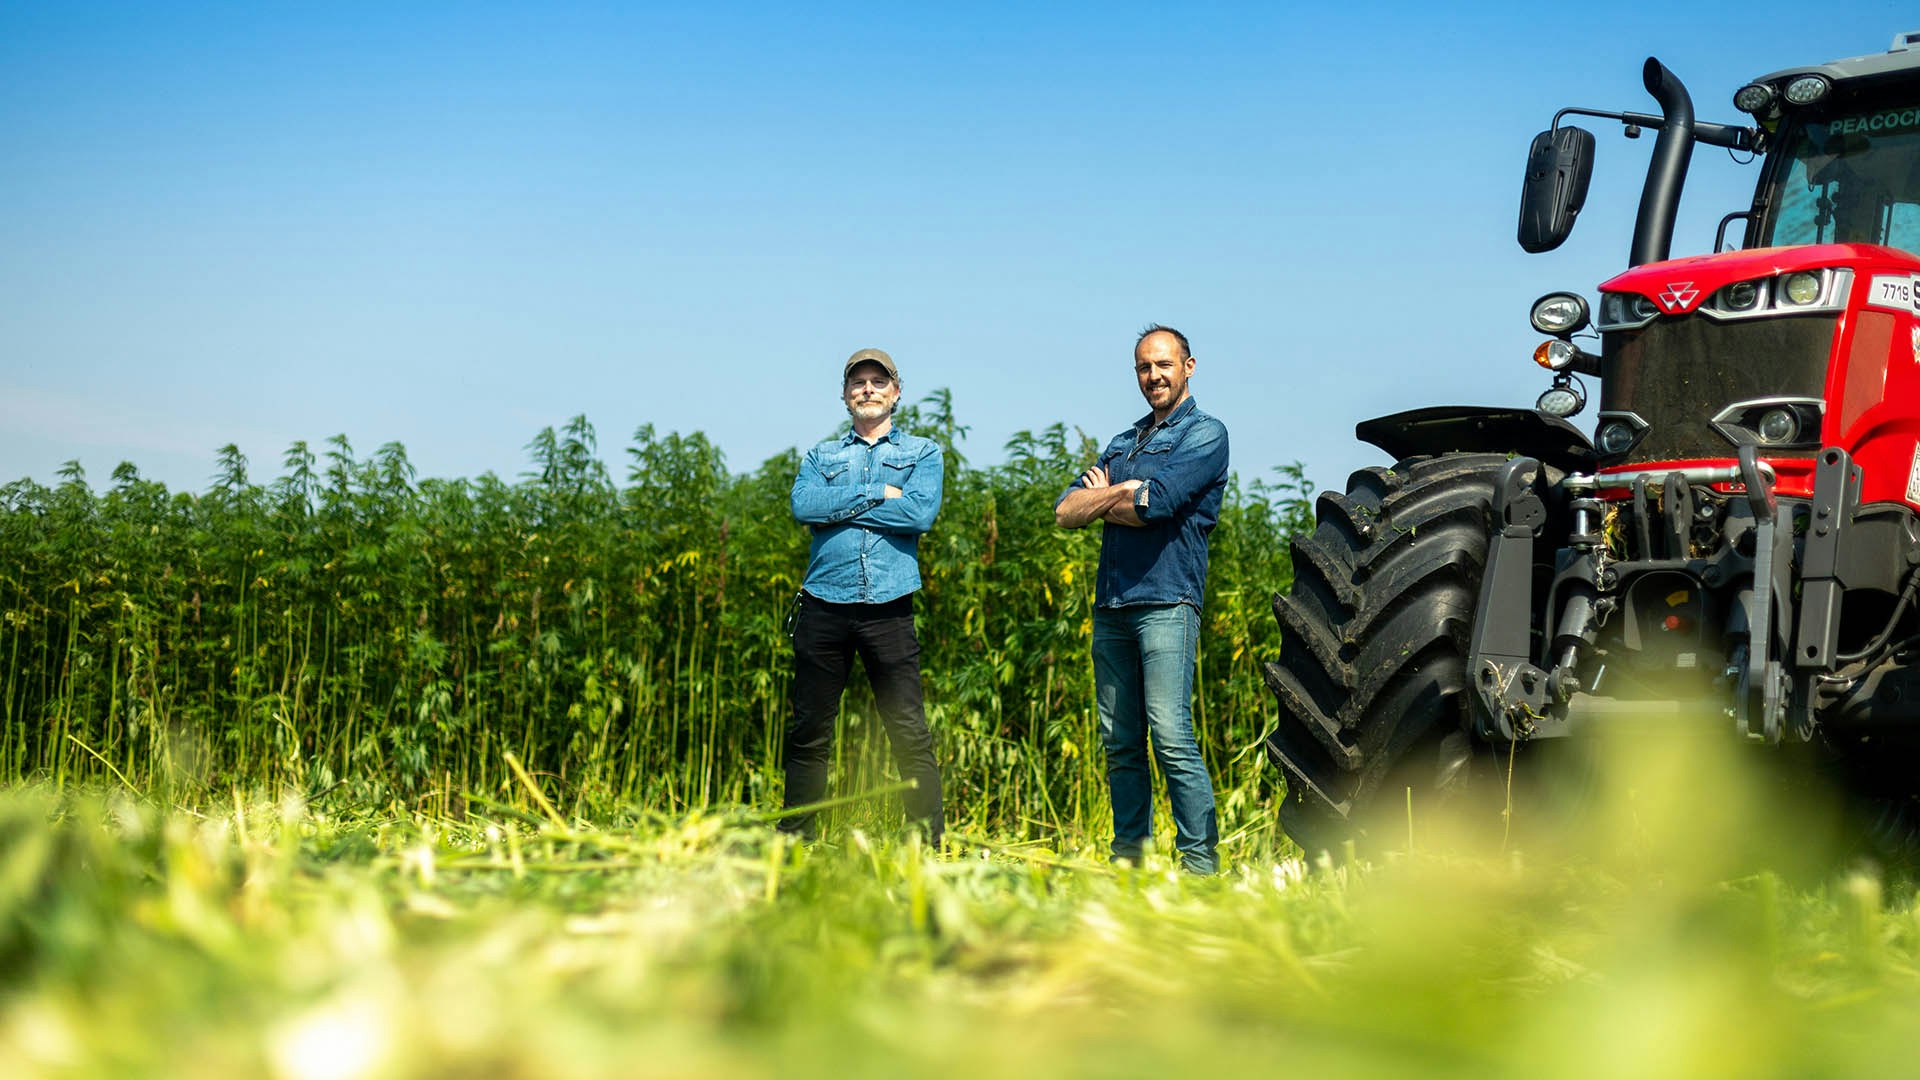 Scott Simpson and Sam Baumber stand next to a tractor in a partially harvested hemp field.